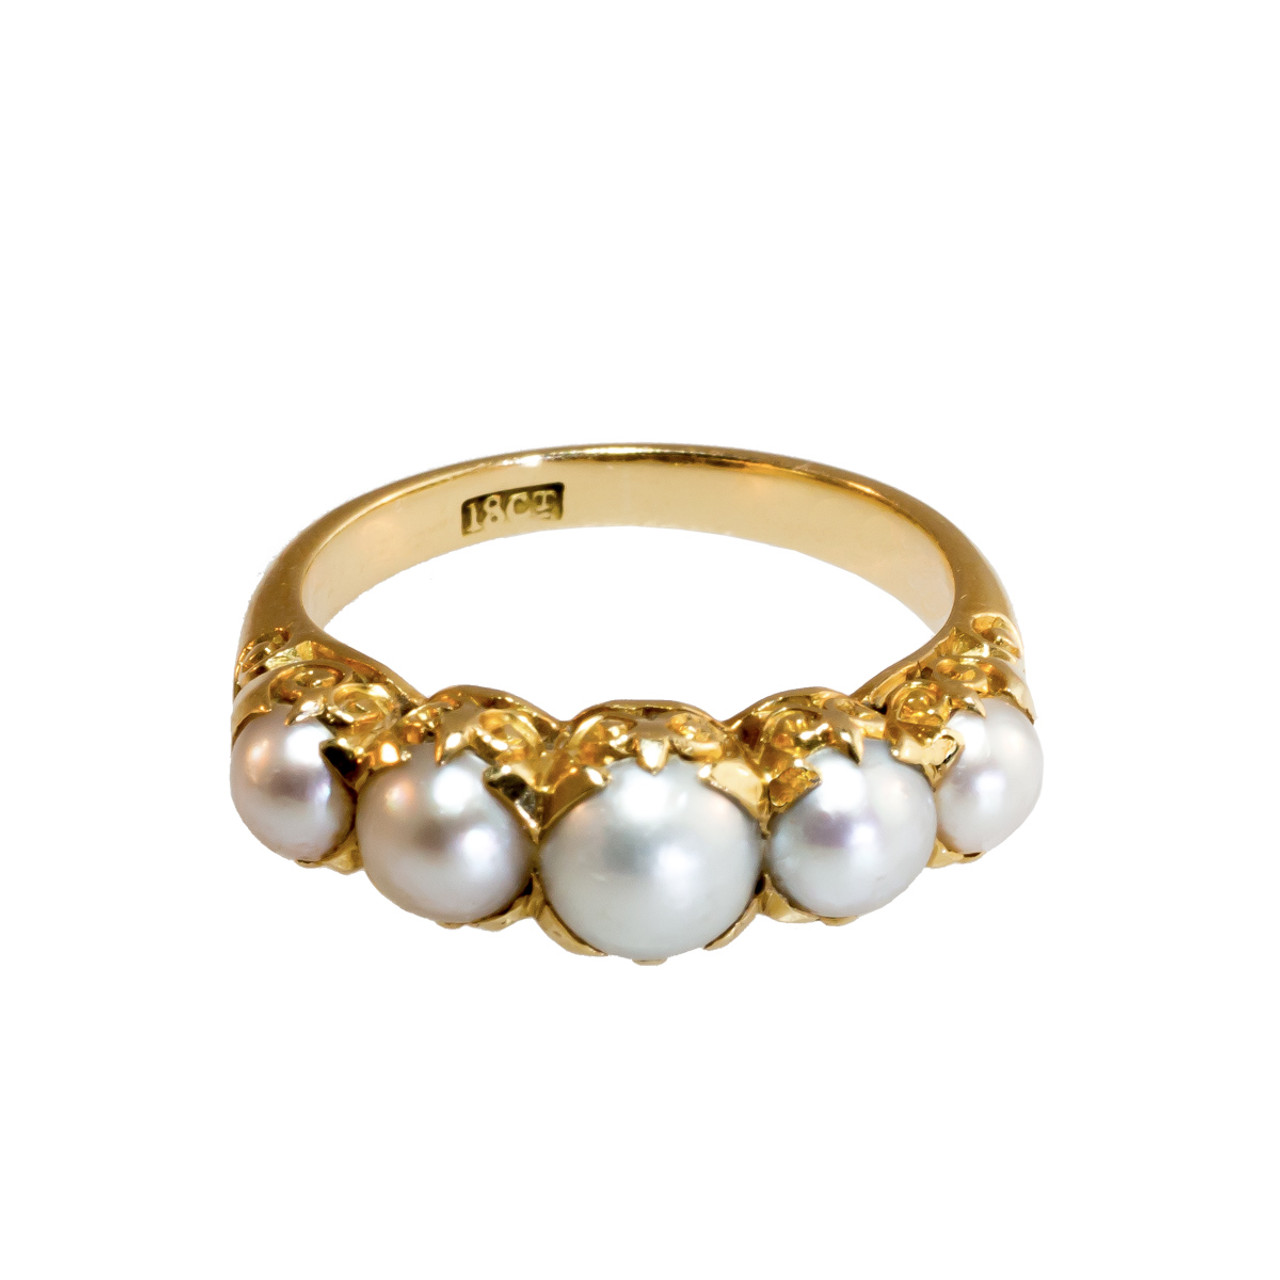 Antique: A Pearl Ring in 18 ct Gold, Half-Hoop Stacker